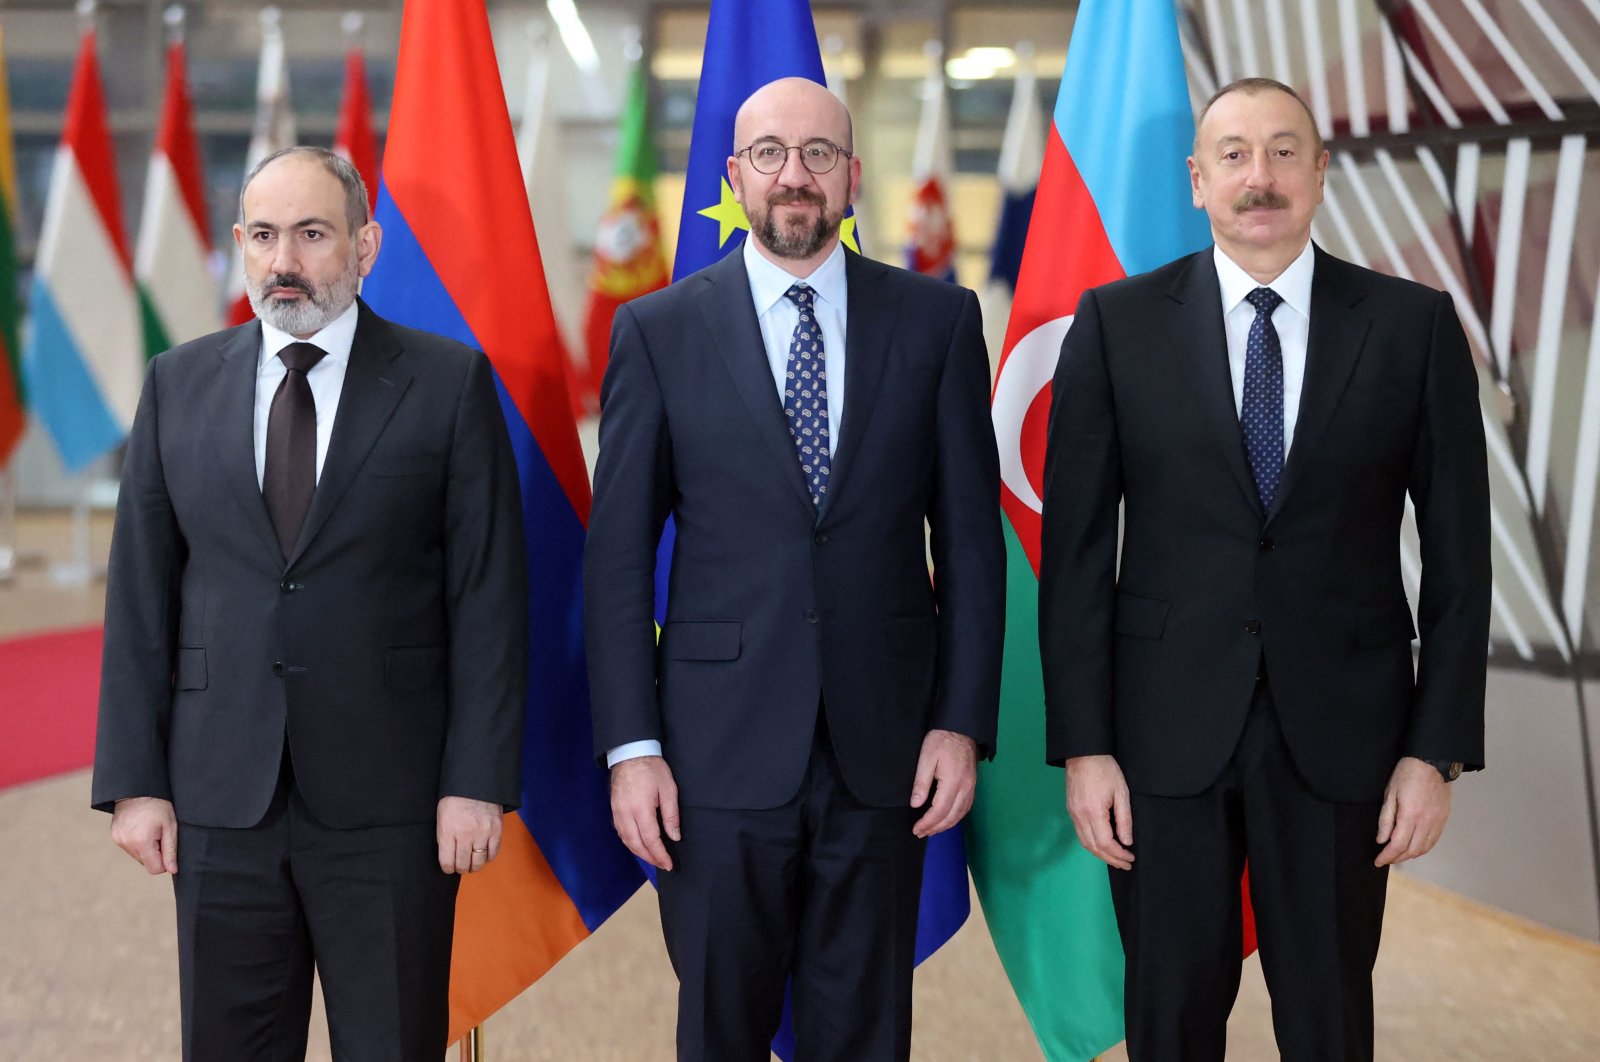 Armenian Prime Minister Nikol Pashinian (L), European Council President Charles Michel (C) and Azerbaijan&#039;s President Ilham Aliyev pose for an official picture before their meeting at the European Council in Brussels, Belgium, April 6, 2022. (AFP Photo)